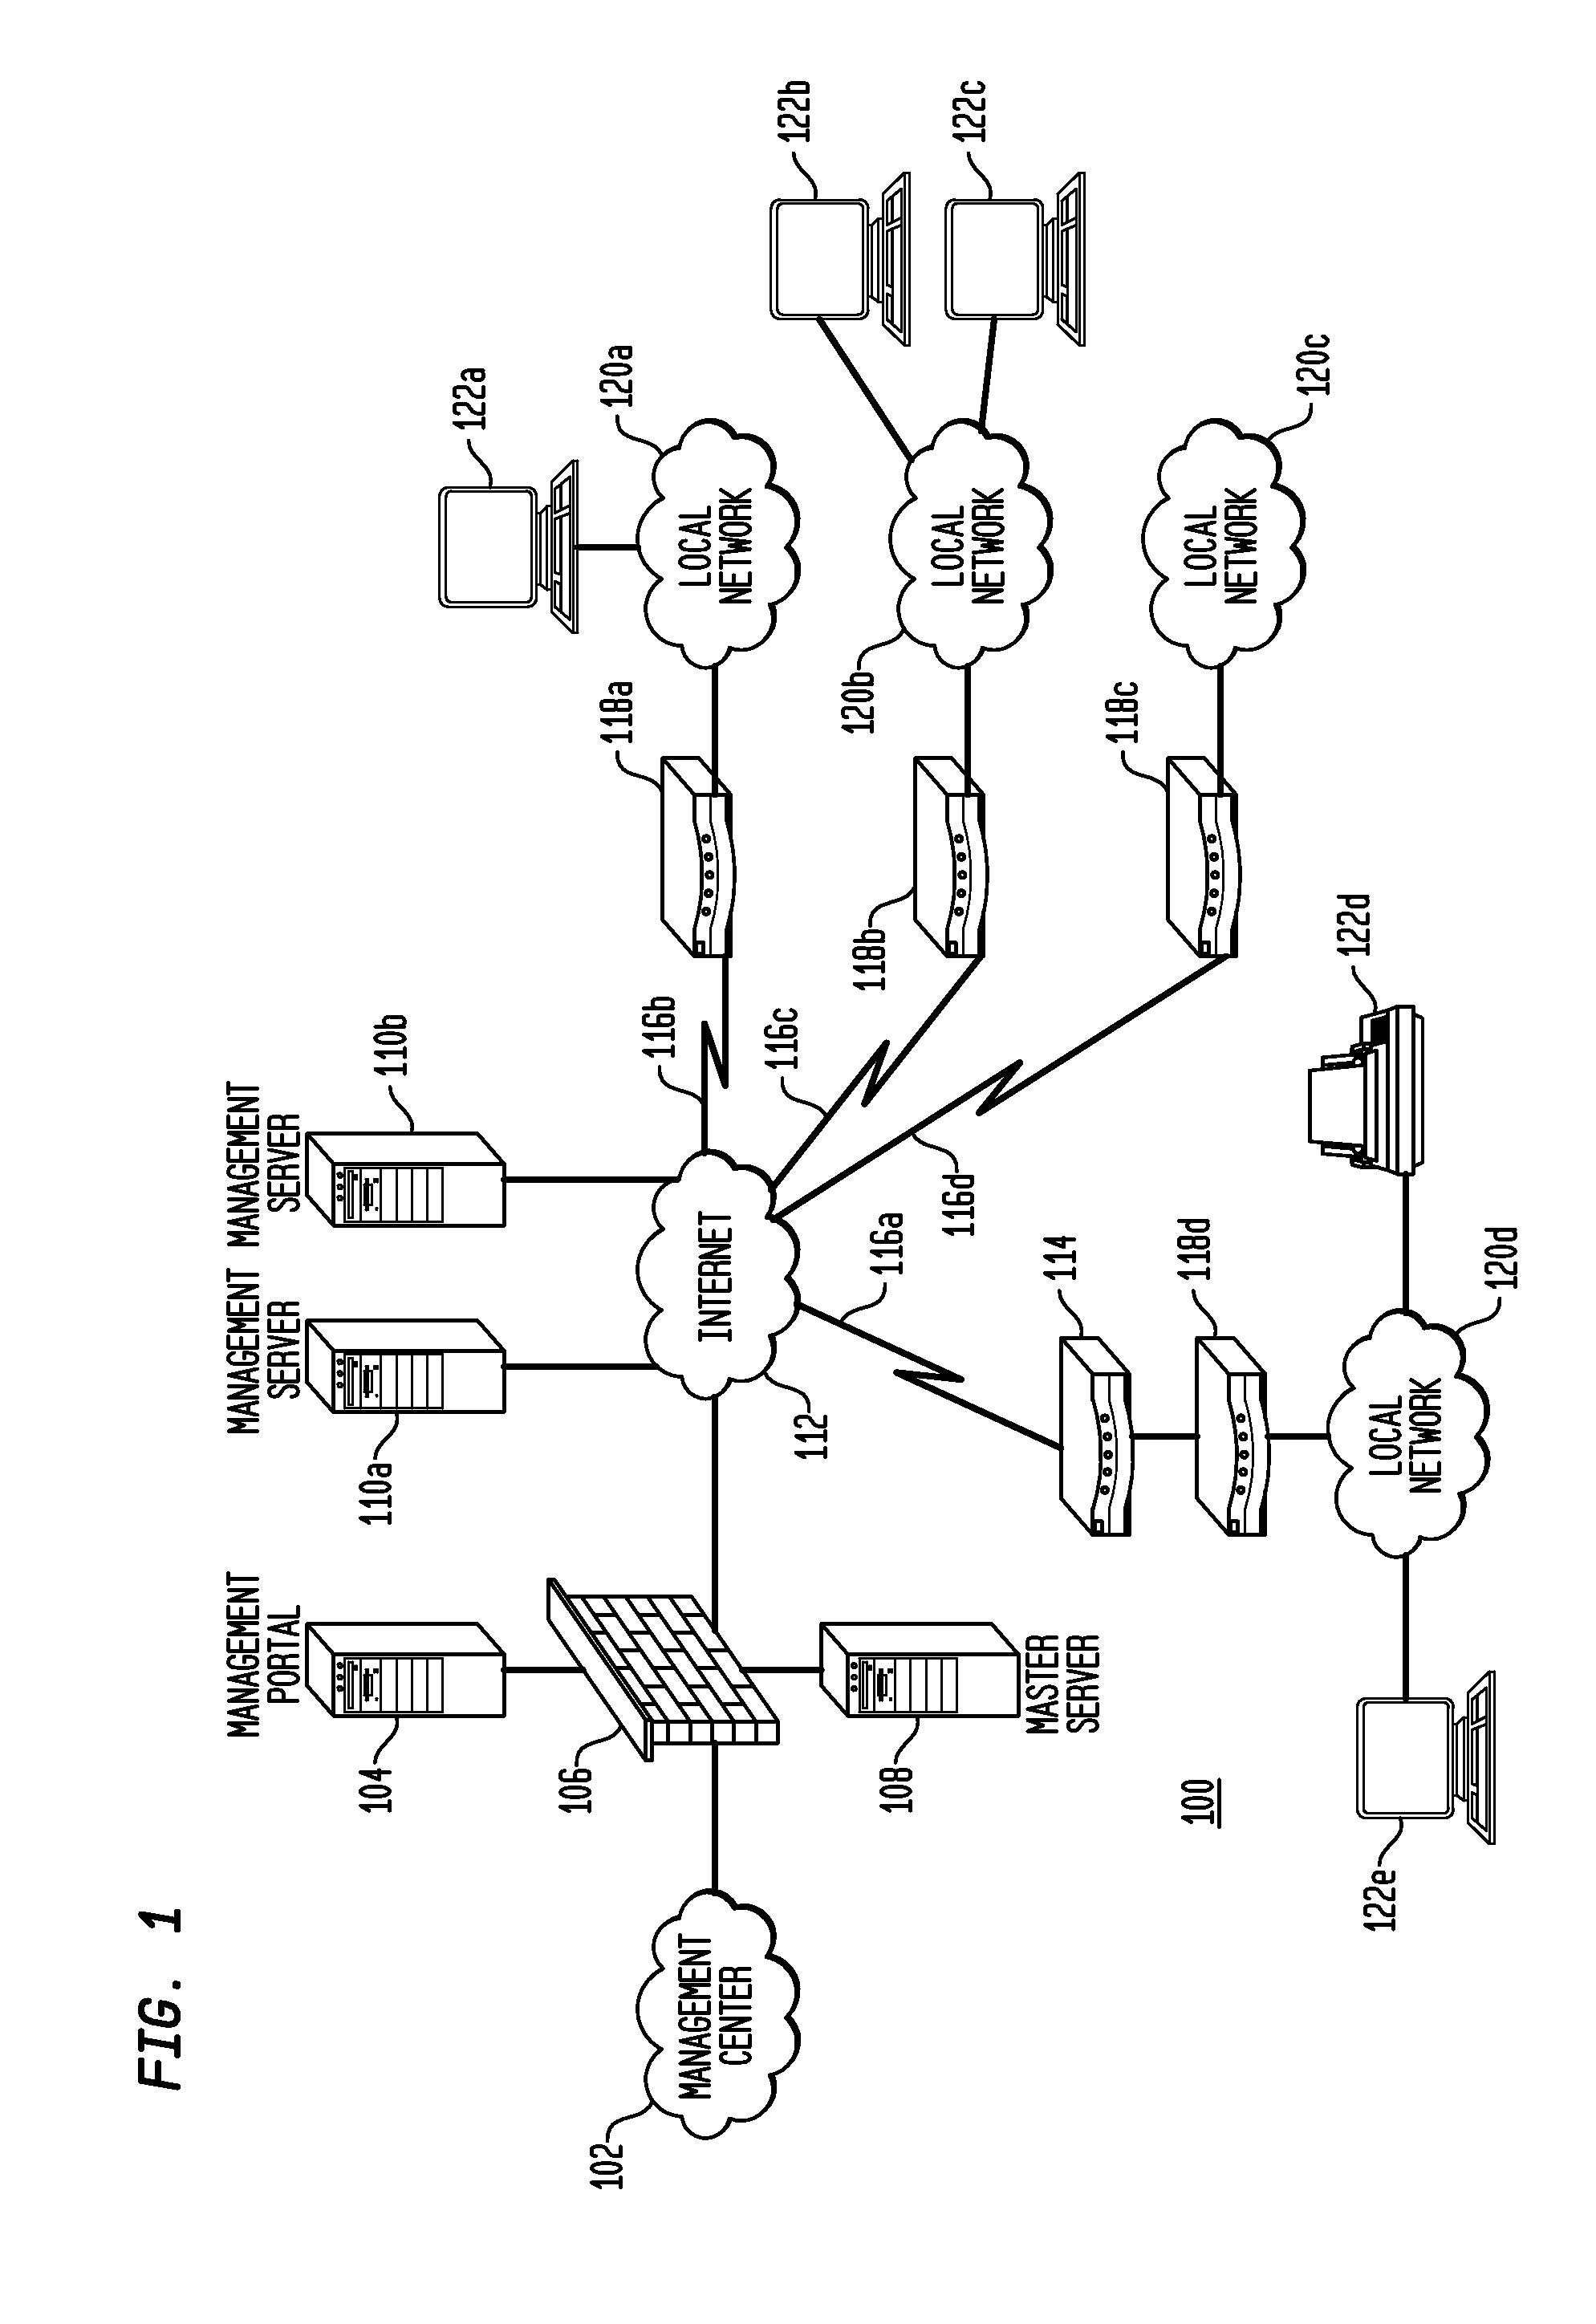 Systems and Methods for Automatically Reconfiguring Virtual Private Networks